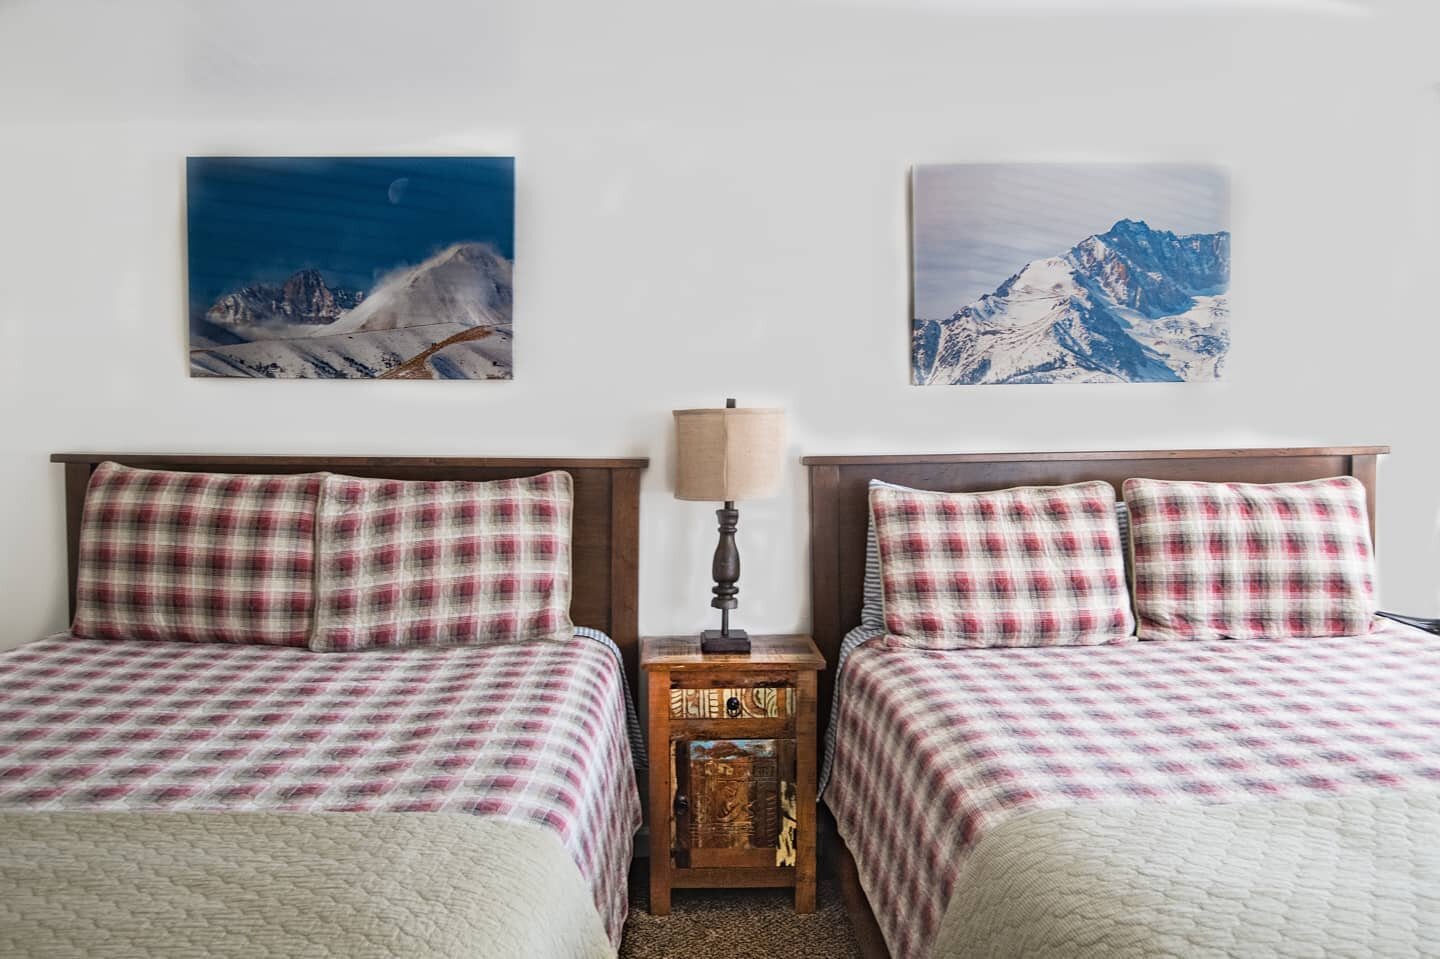 Cabin 1 (Shepherd) is ideal if you are a family or pair of friends traveling with a dog. We are  listening to all of our guest feedback and  have been adding laptop work spaces to all of our cabins!
.
.
.
#easternsierra #highway395 #395#sierranevada 